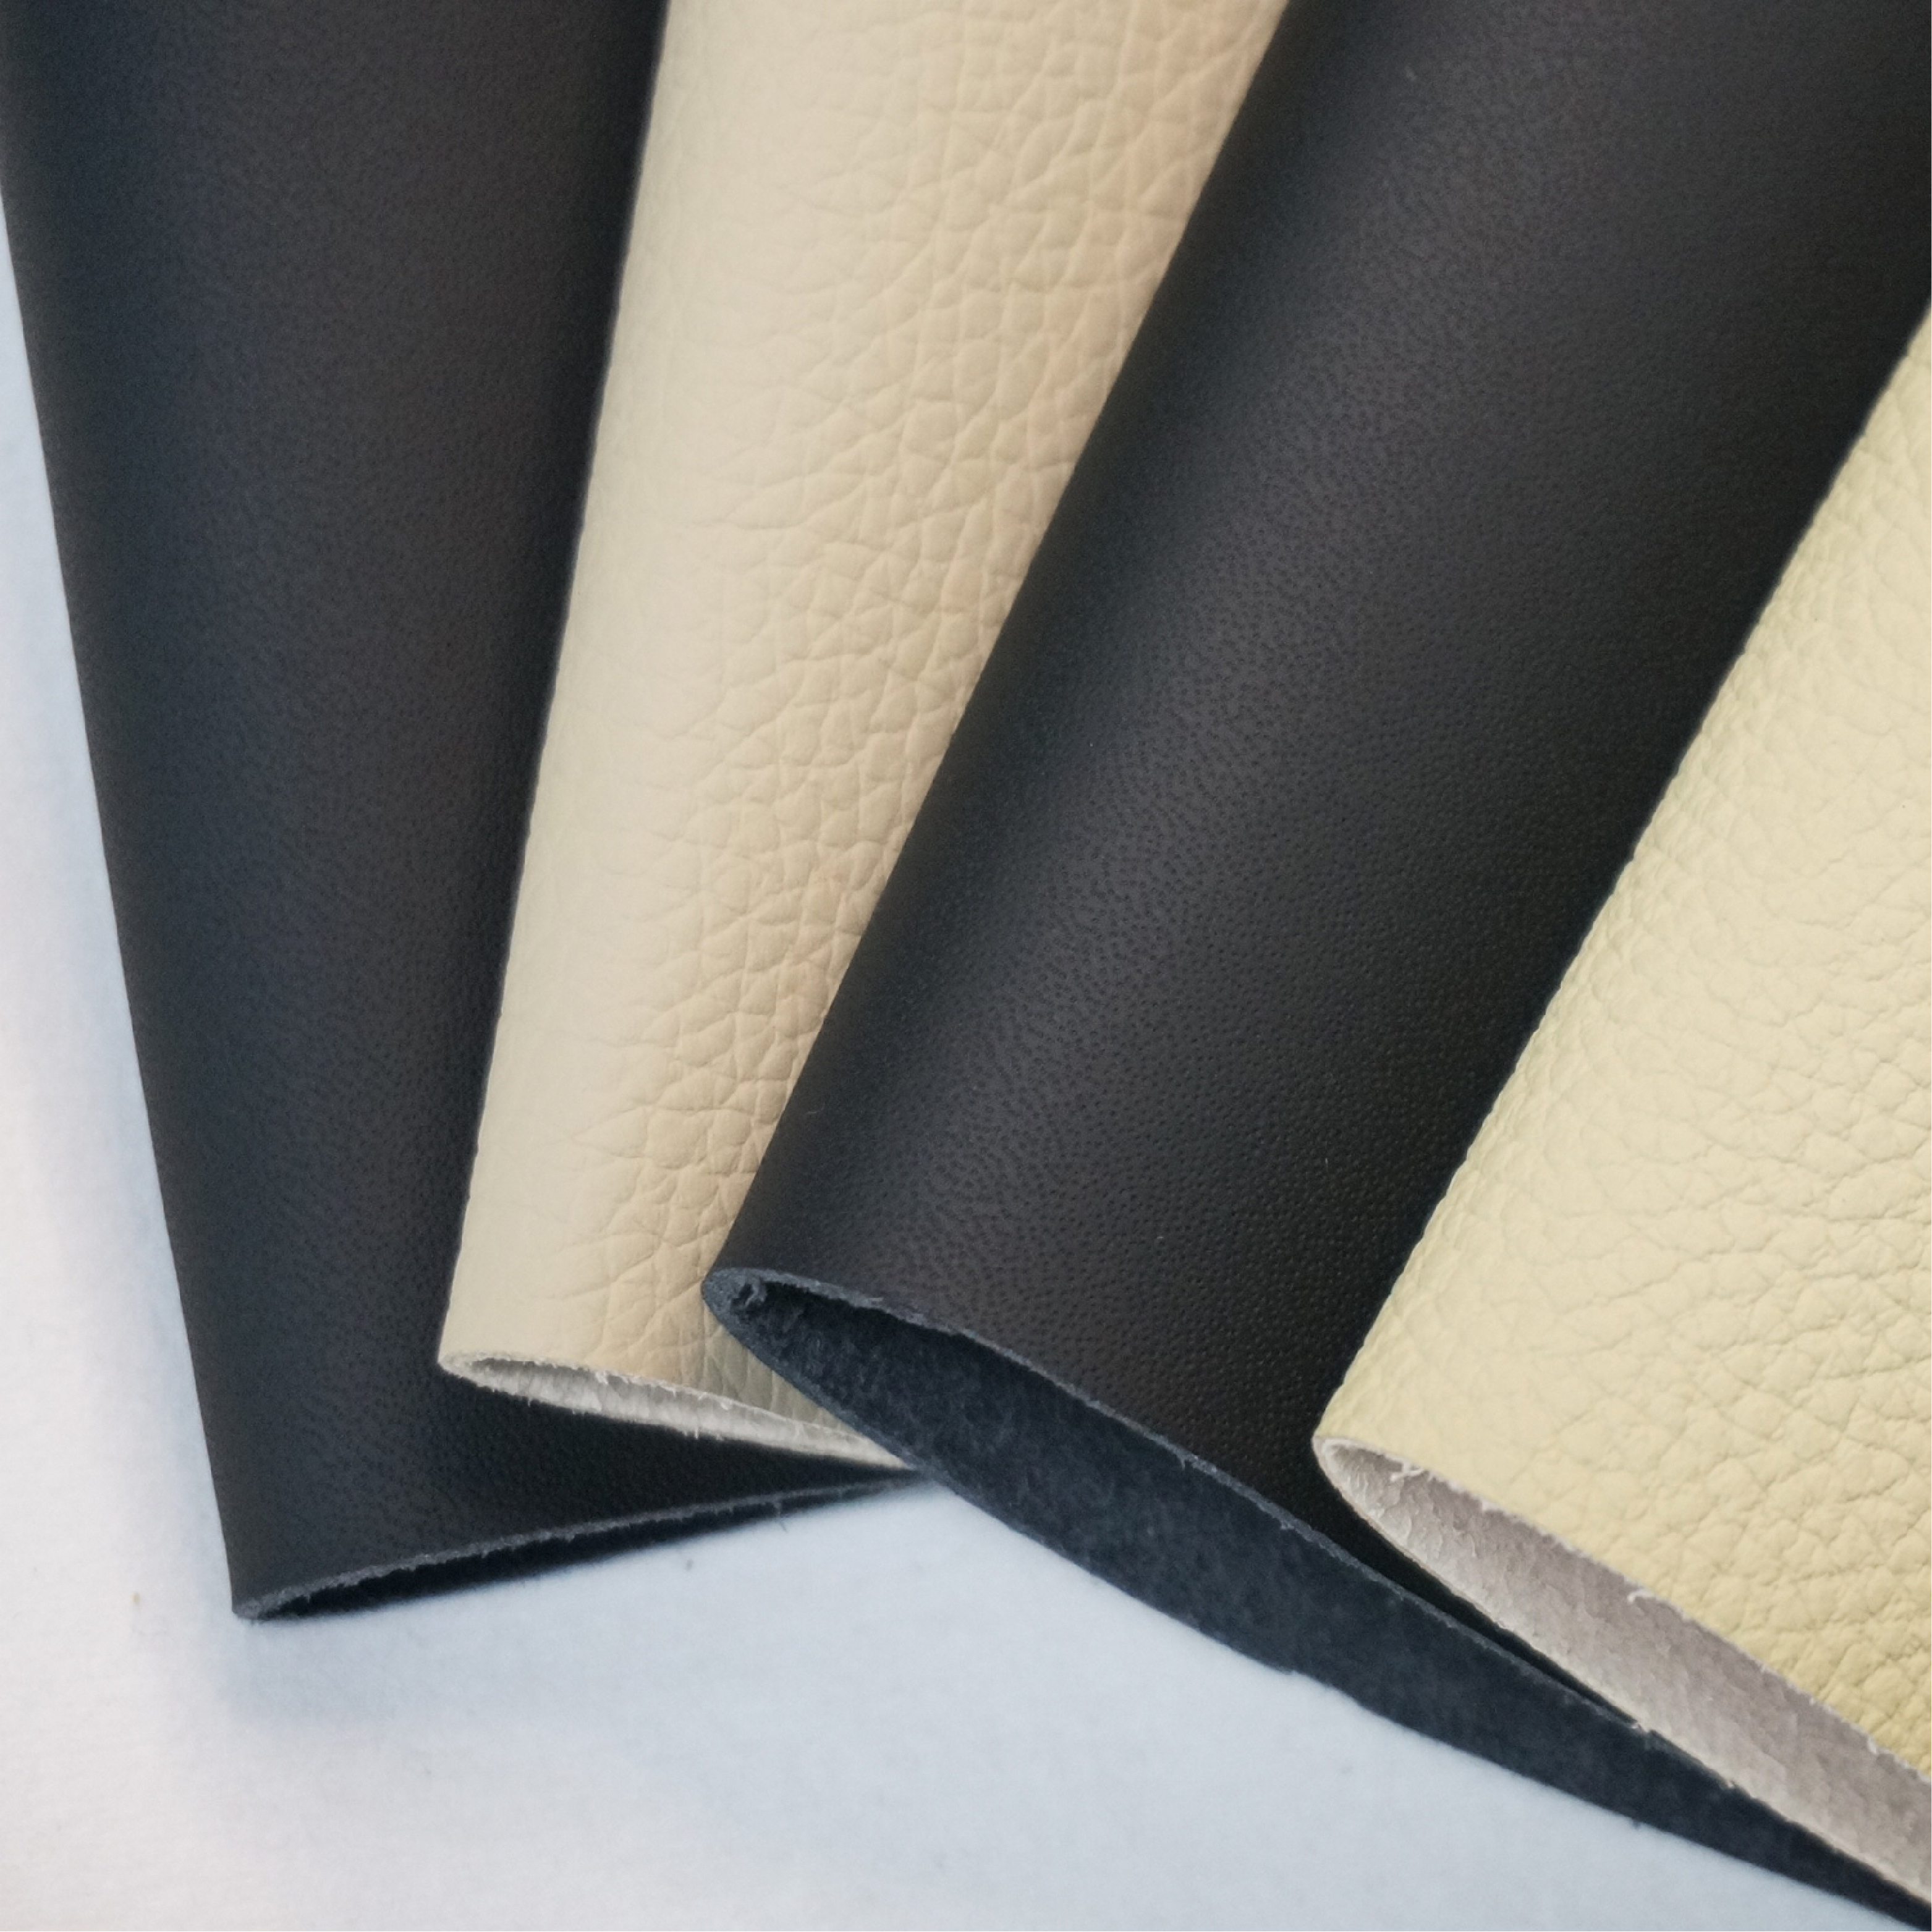 Classic litchi pattern Microfiber leather for notebook Featured Image